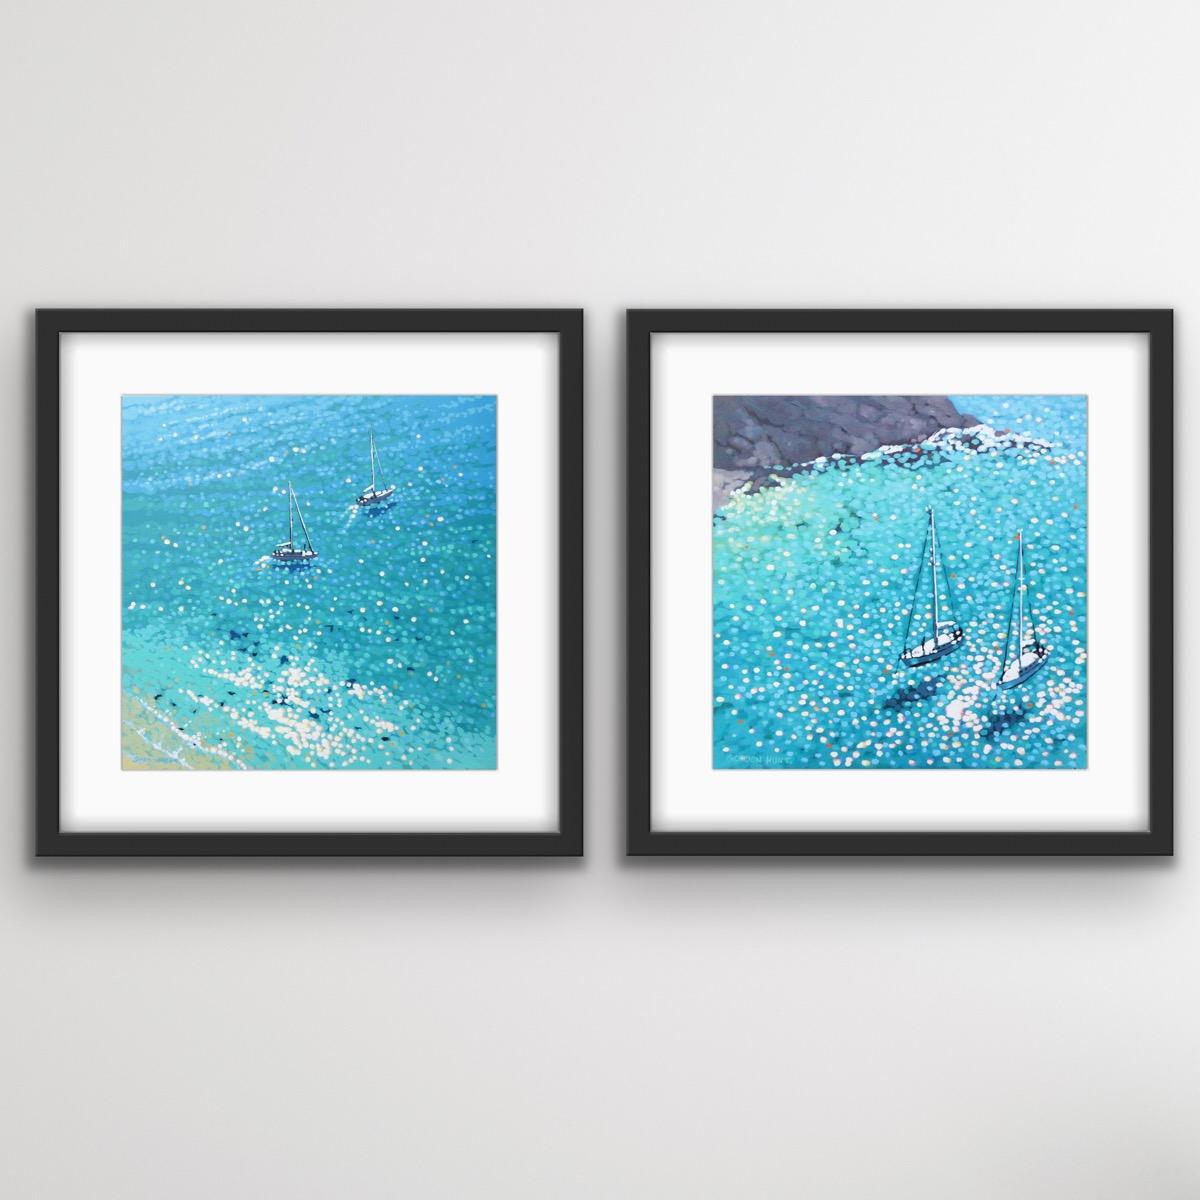 Gordon Hunt Landscape Print - Turquoise Bay and Lantic Lunch (small) Diptych